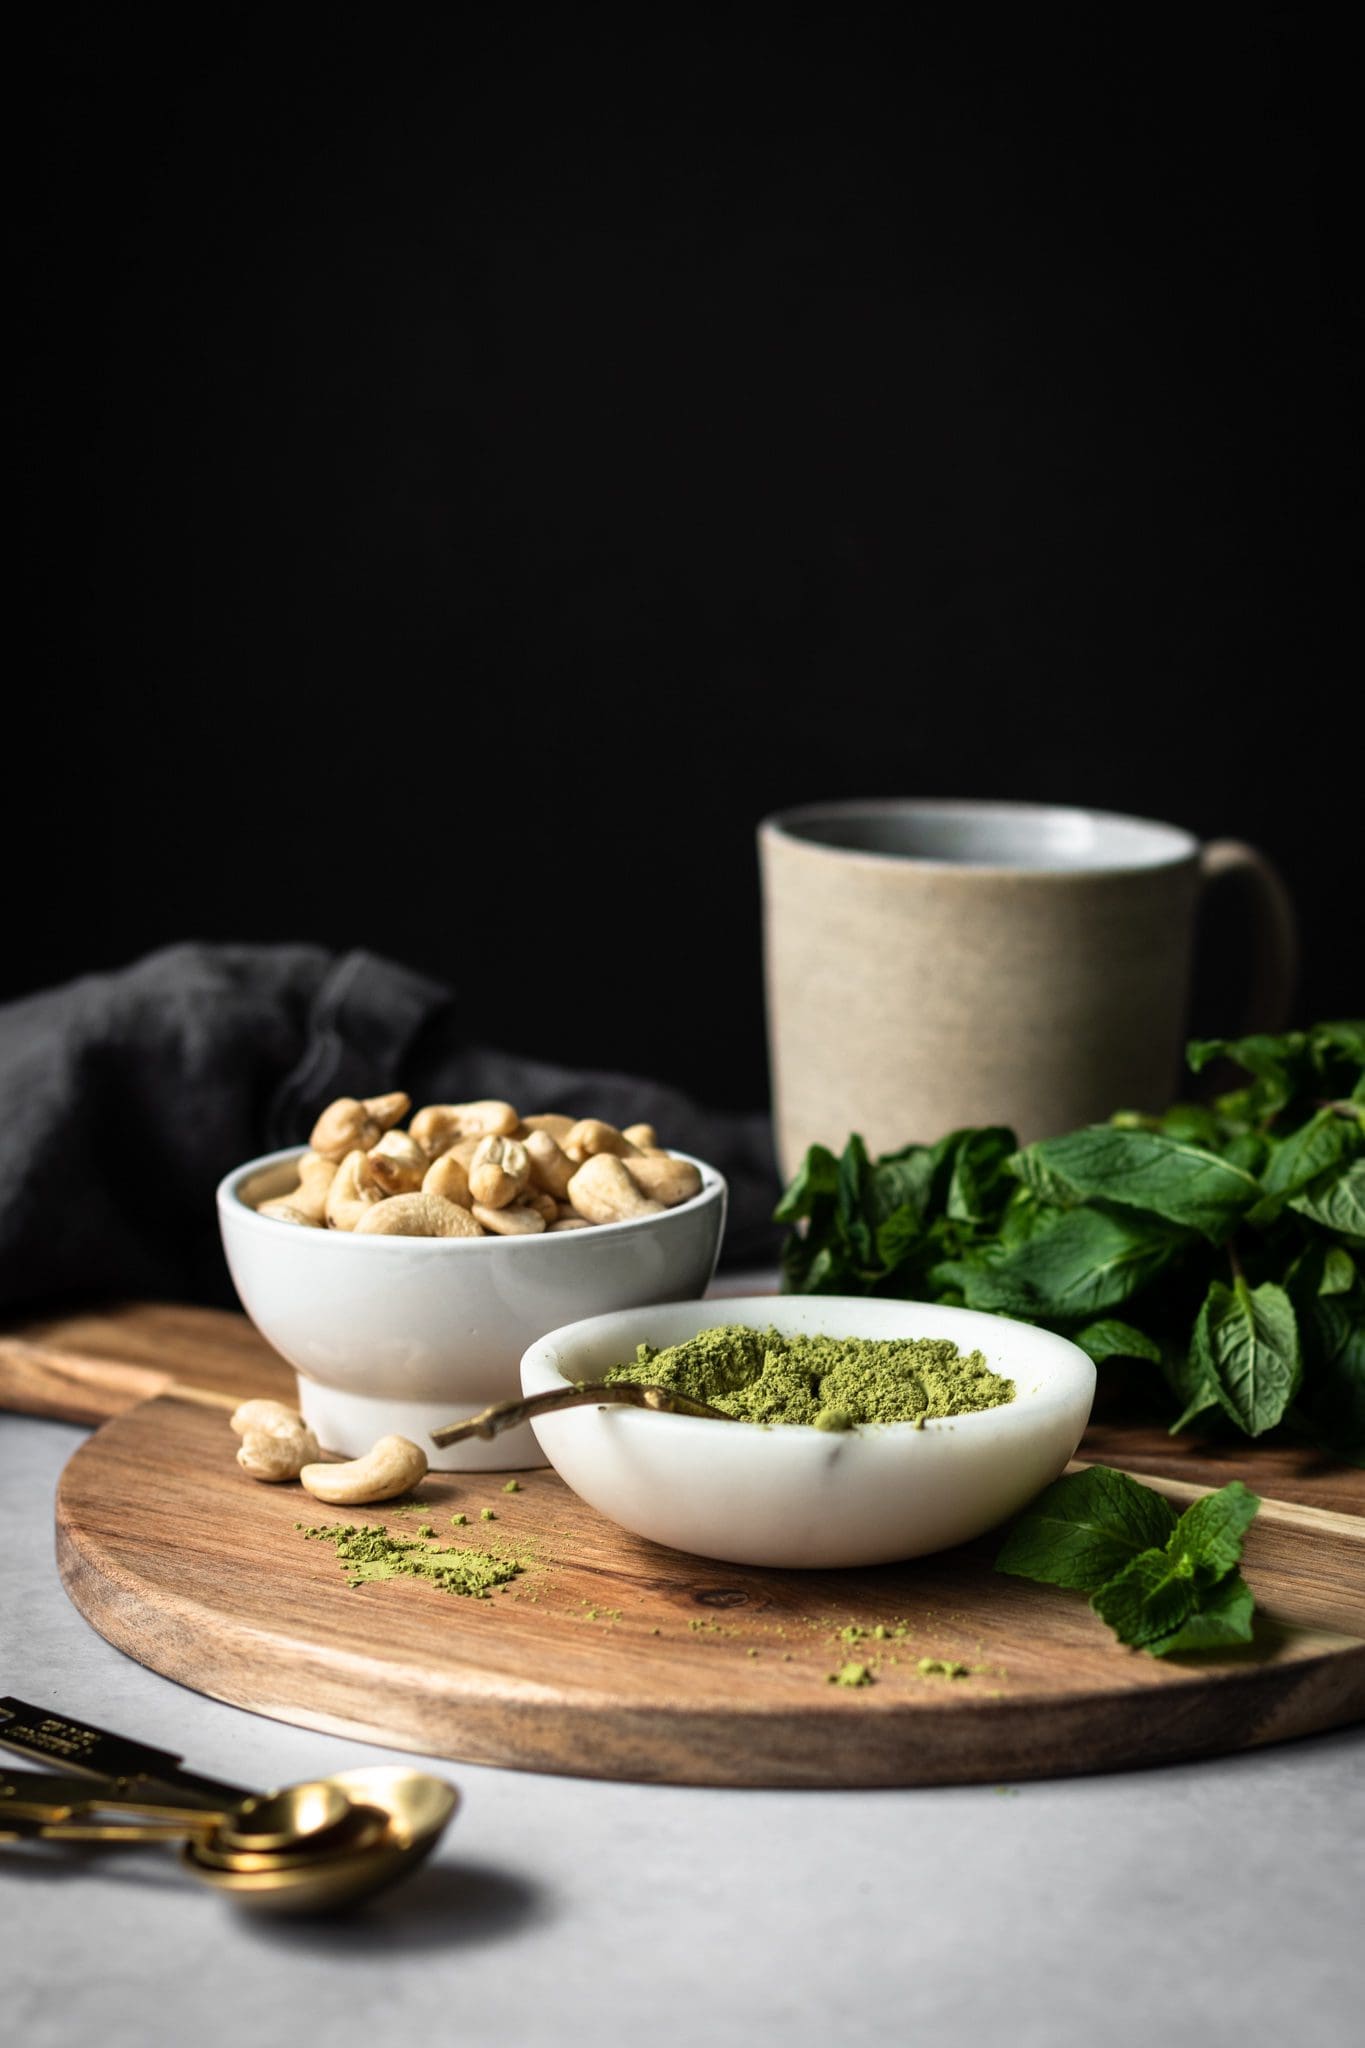 matcha, cashews and mint leaves from the side